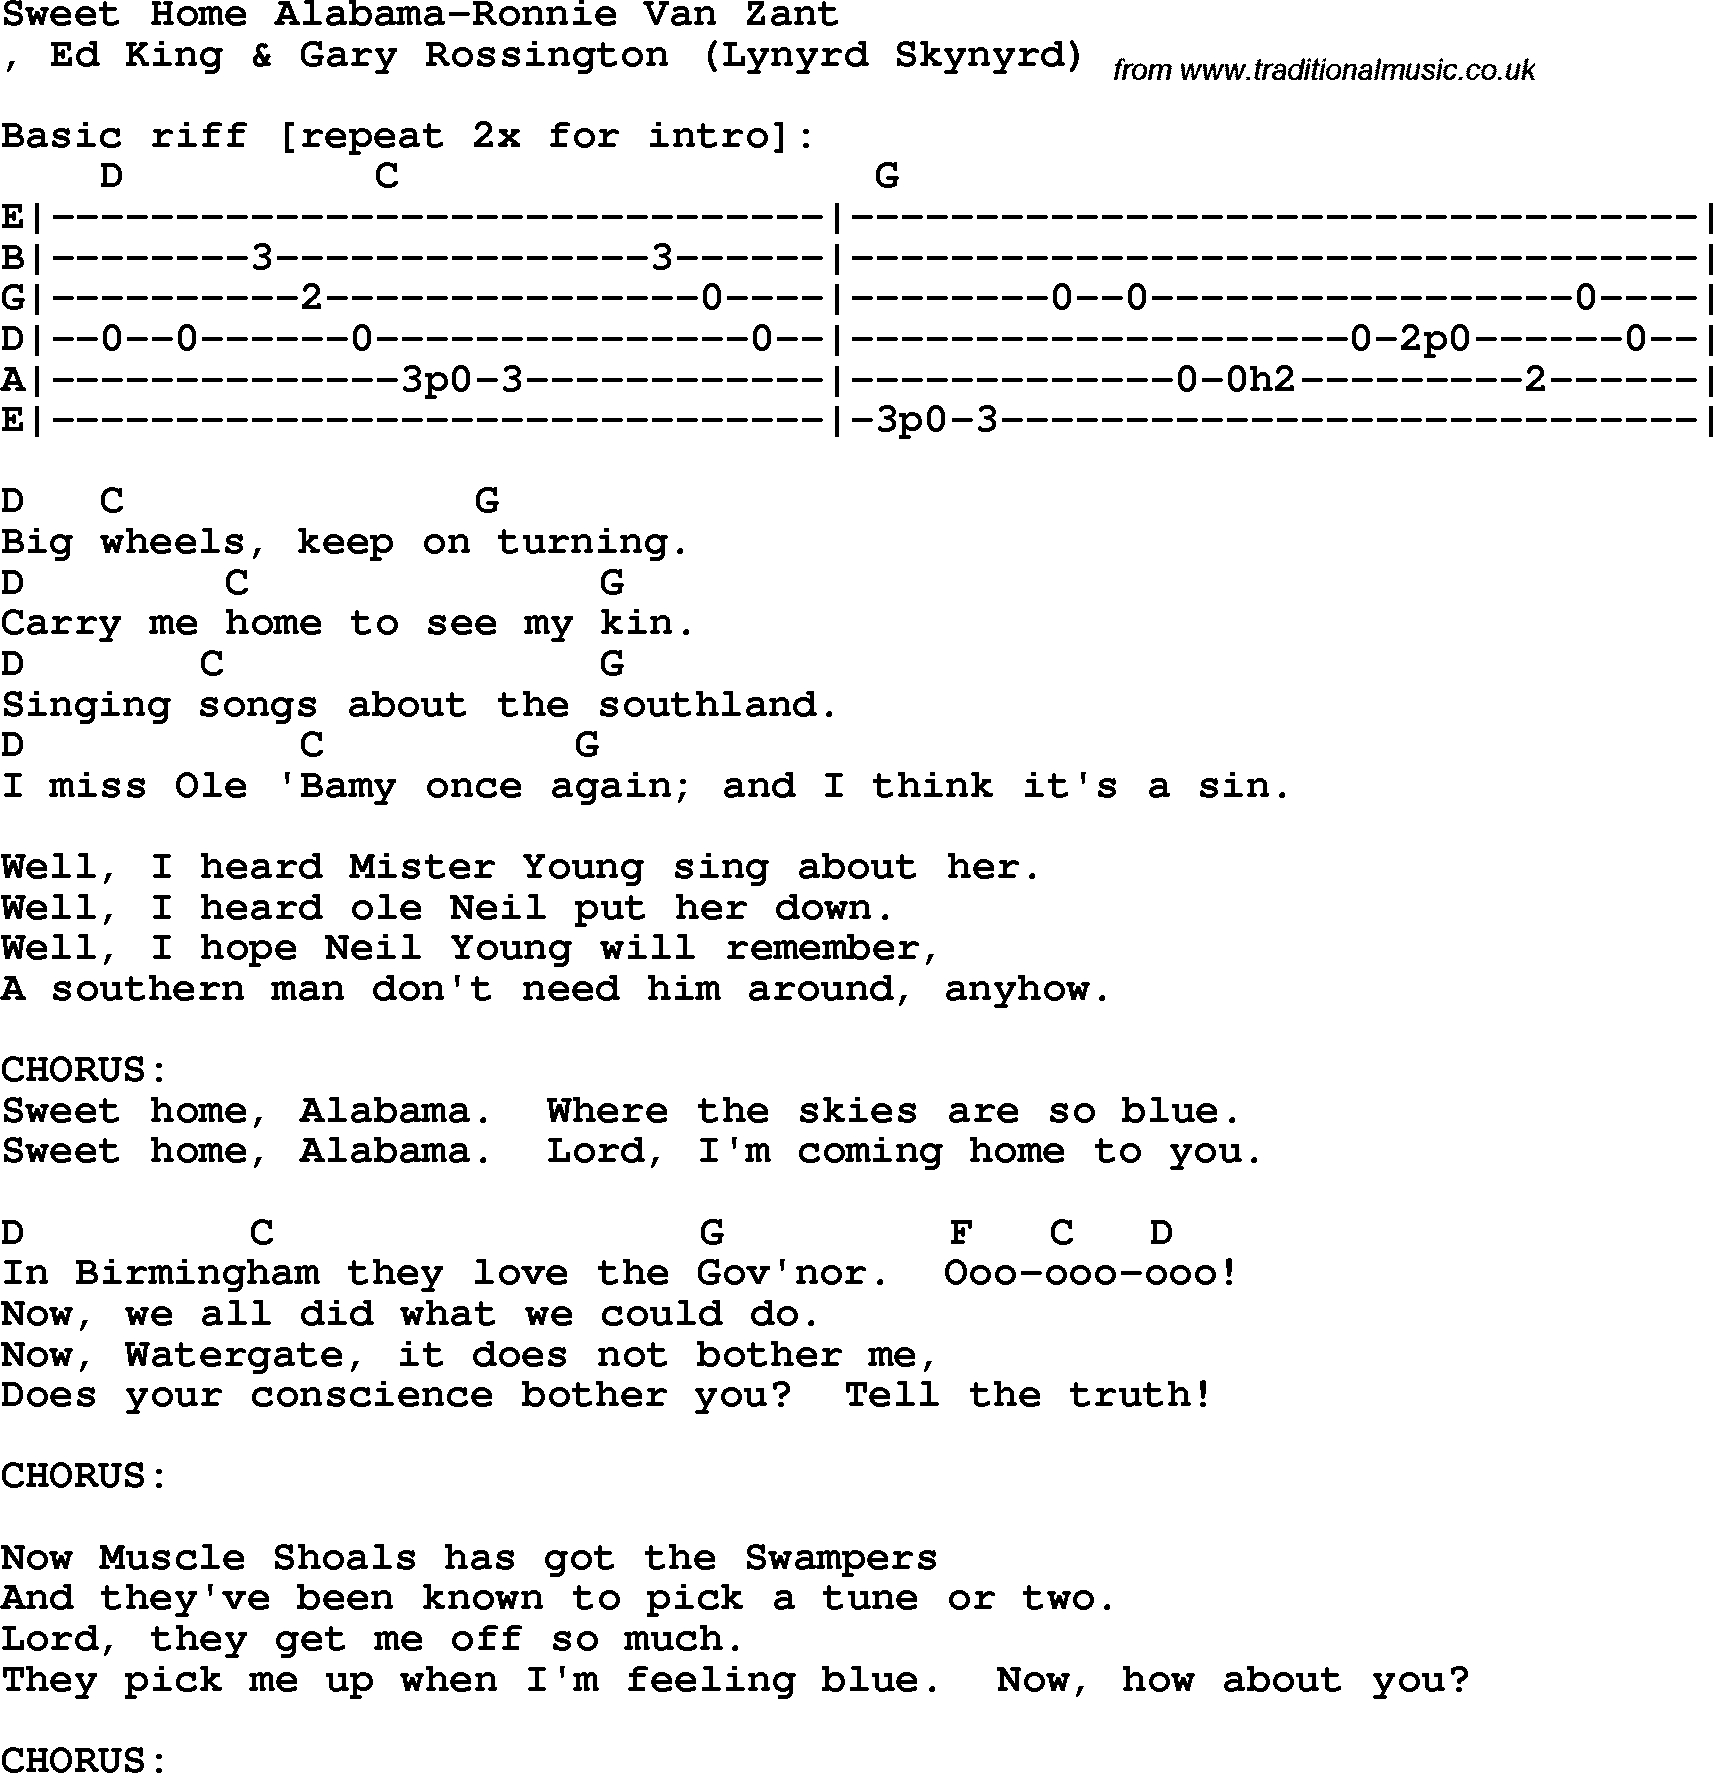 Sweet Home Alabama Chords Protest Song Sweet Home Alabama Ronnie Van Zant Lyrics And Chords